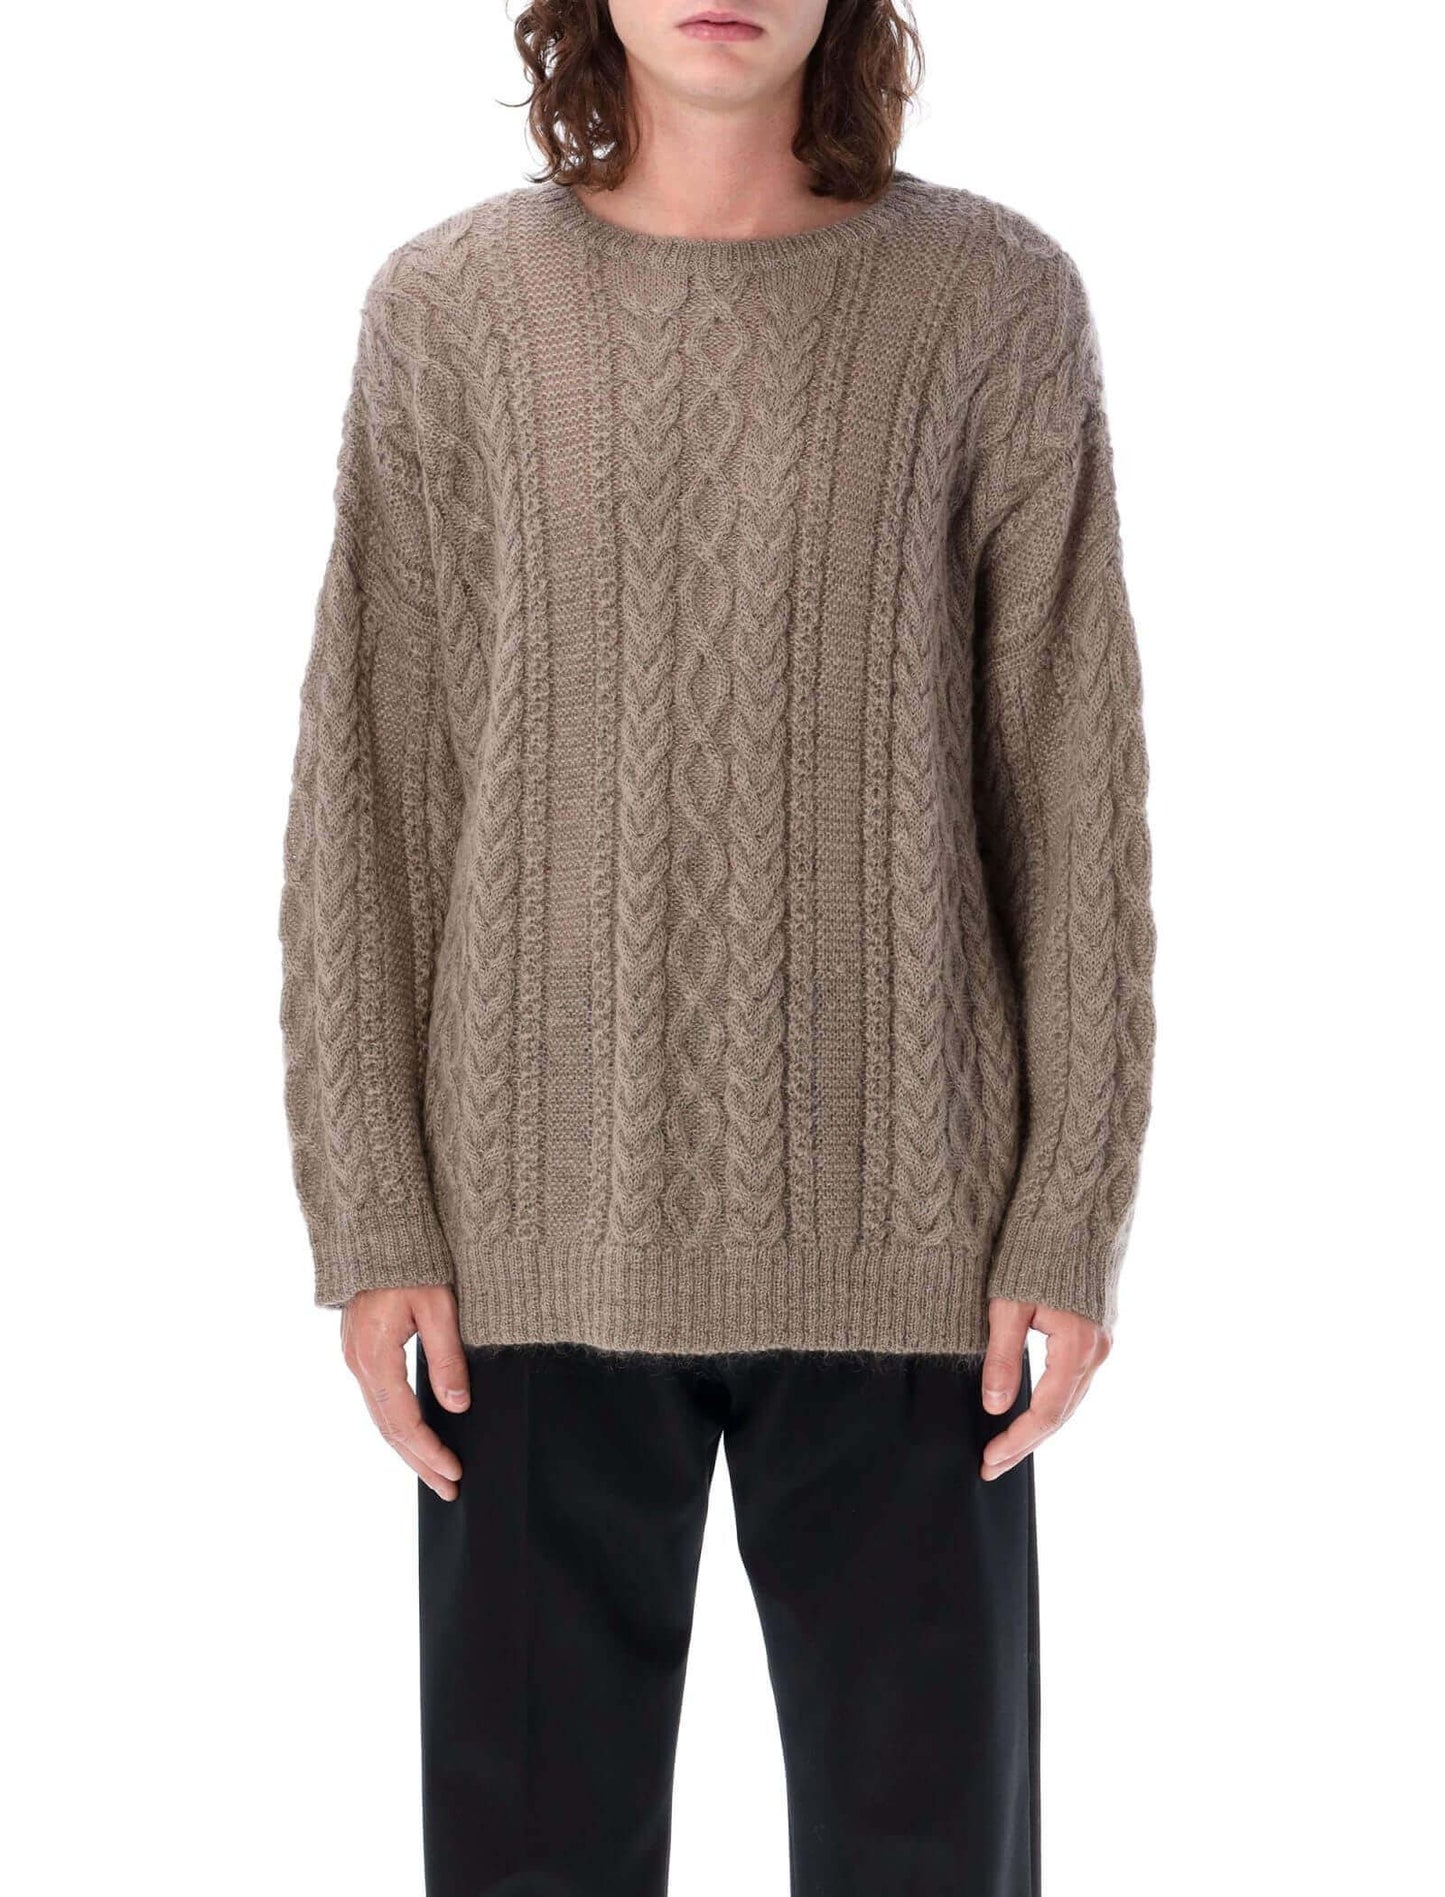 Cable-Knit Wool Sweater in Brown | Bespoke Knitwear Manufacturer